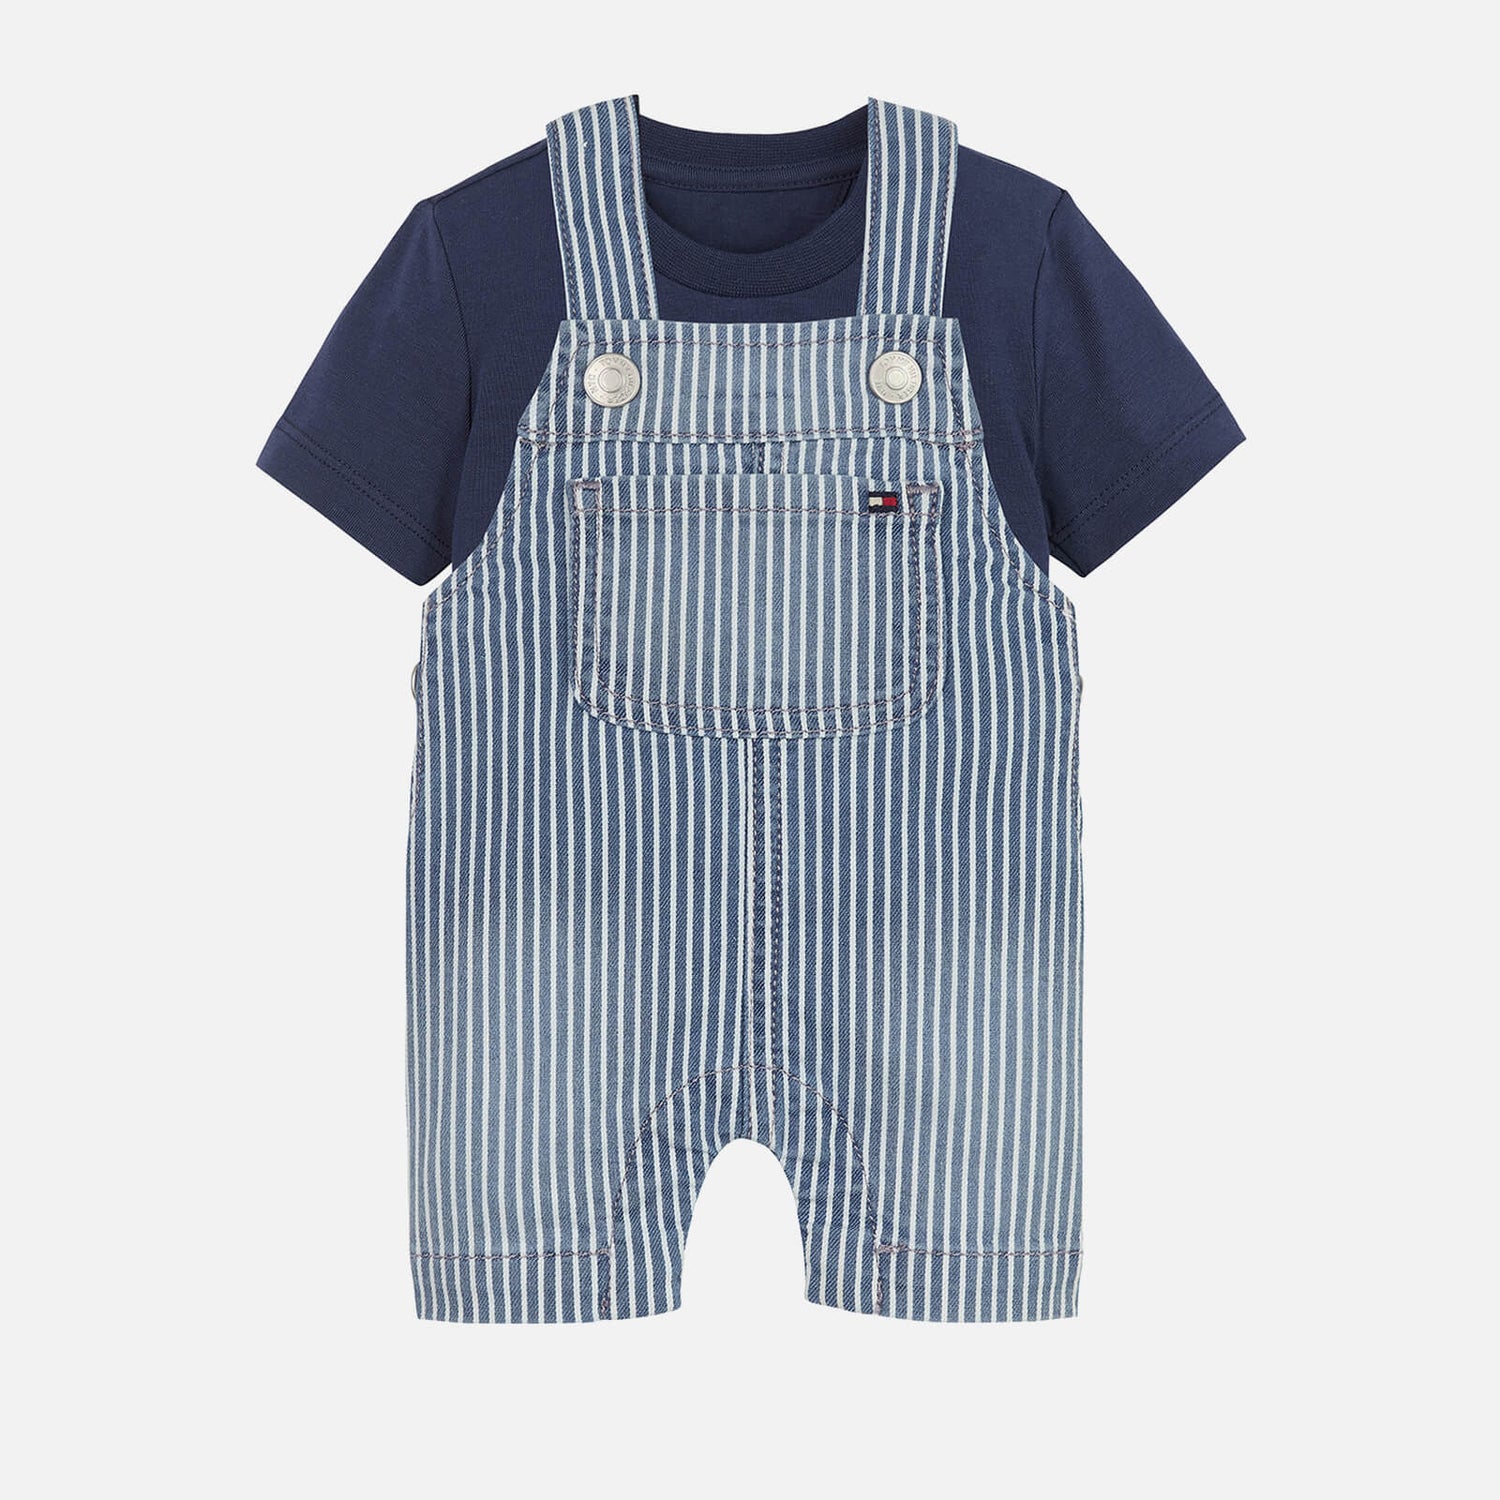 Tommy Hilfiger Baby Striped Cotton-Blend Dungarees and T-Shirt Set